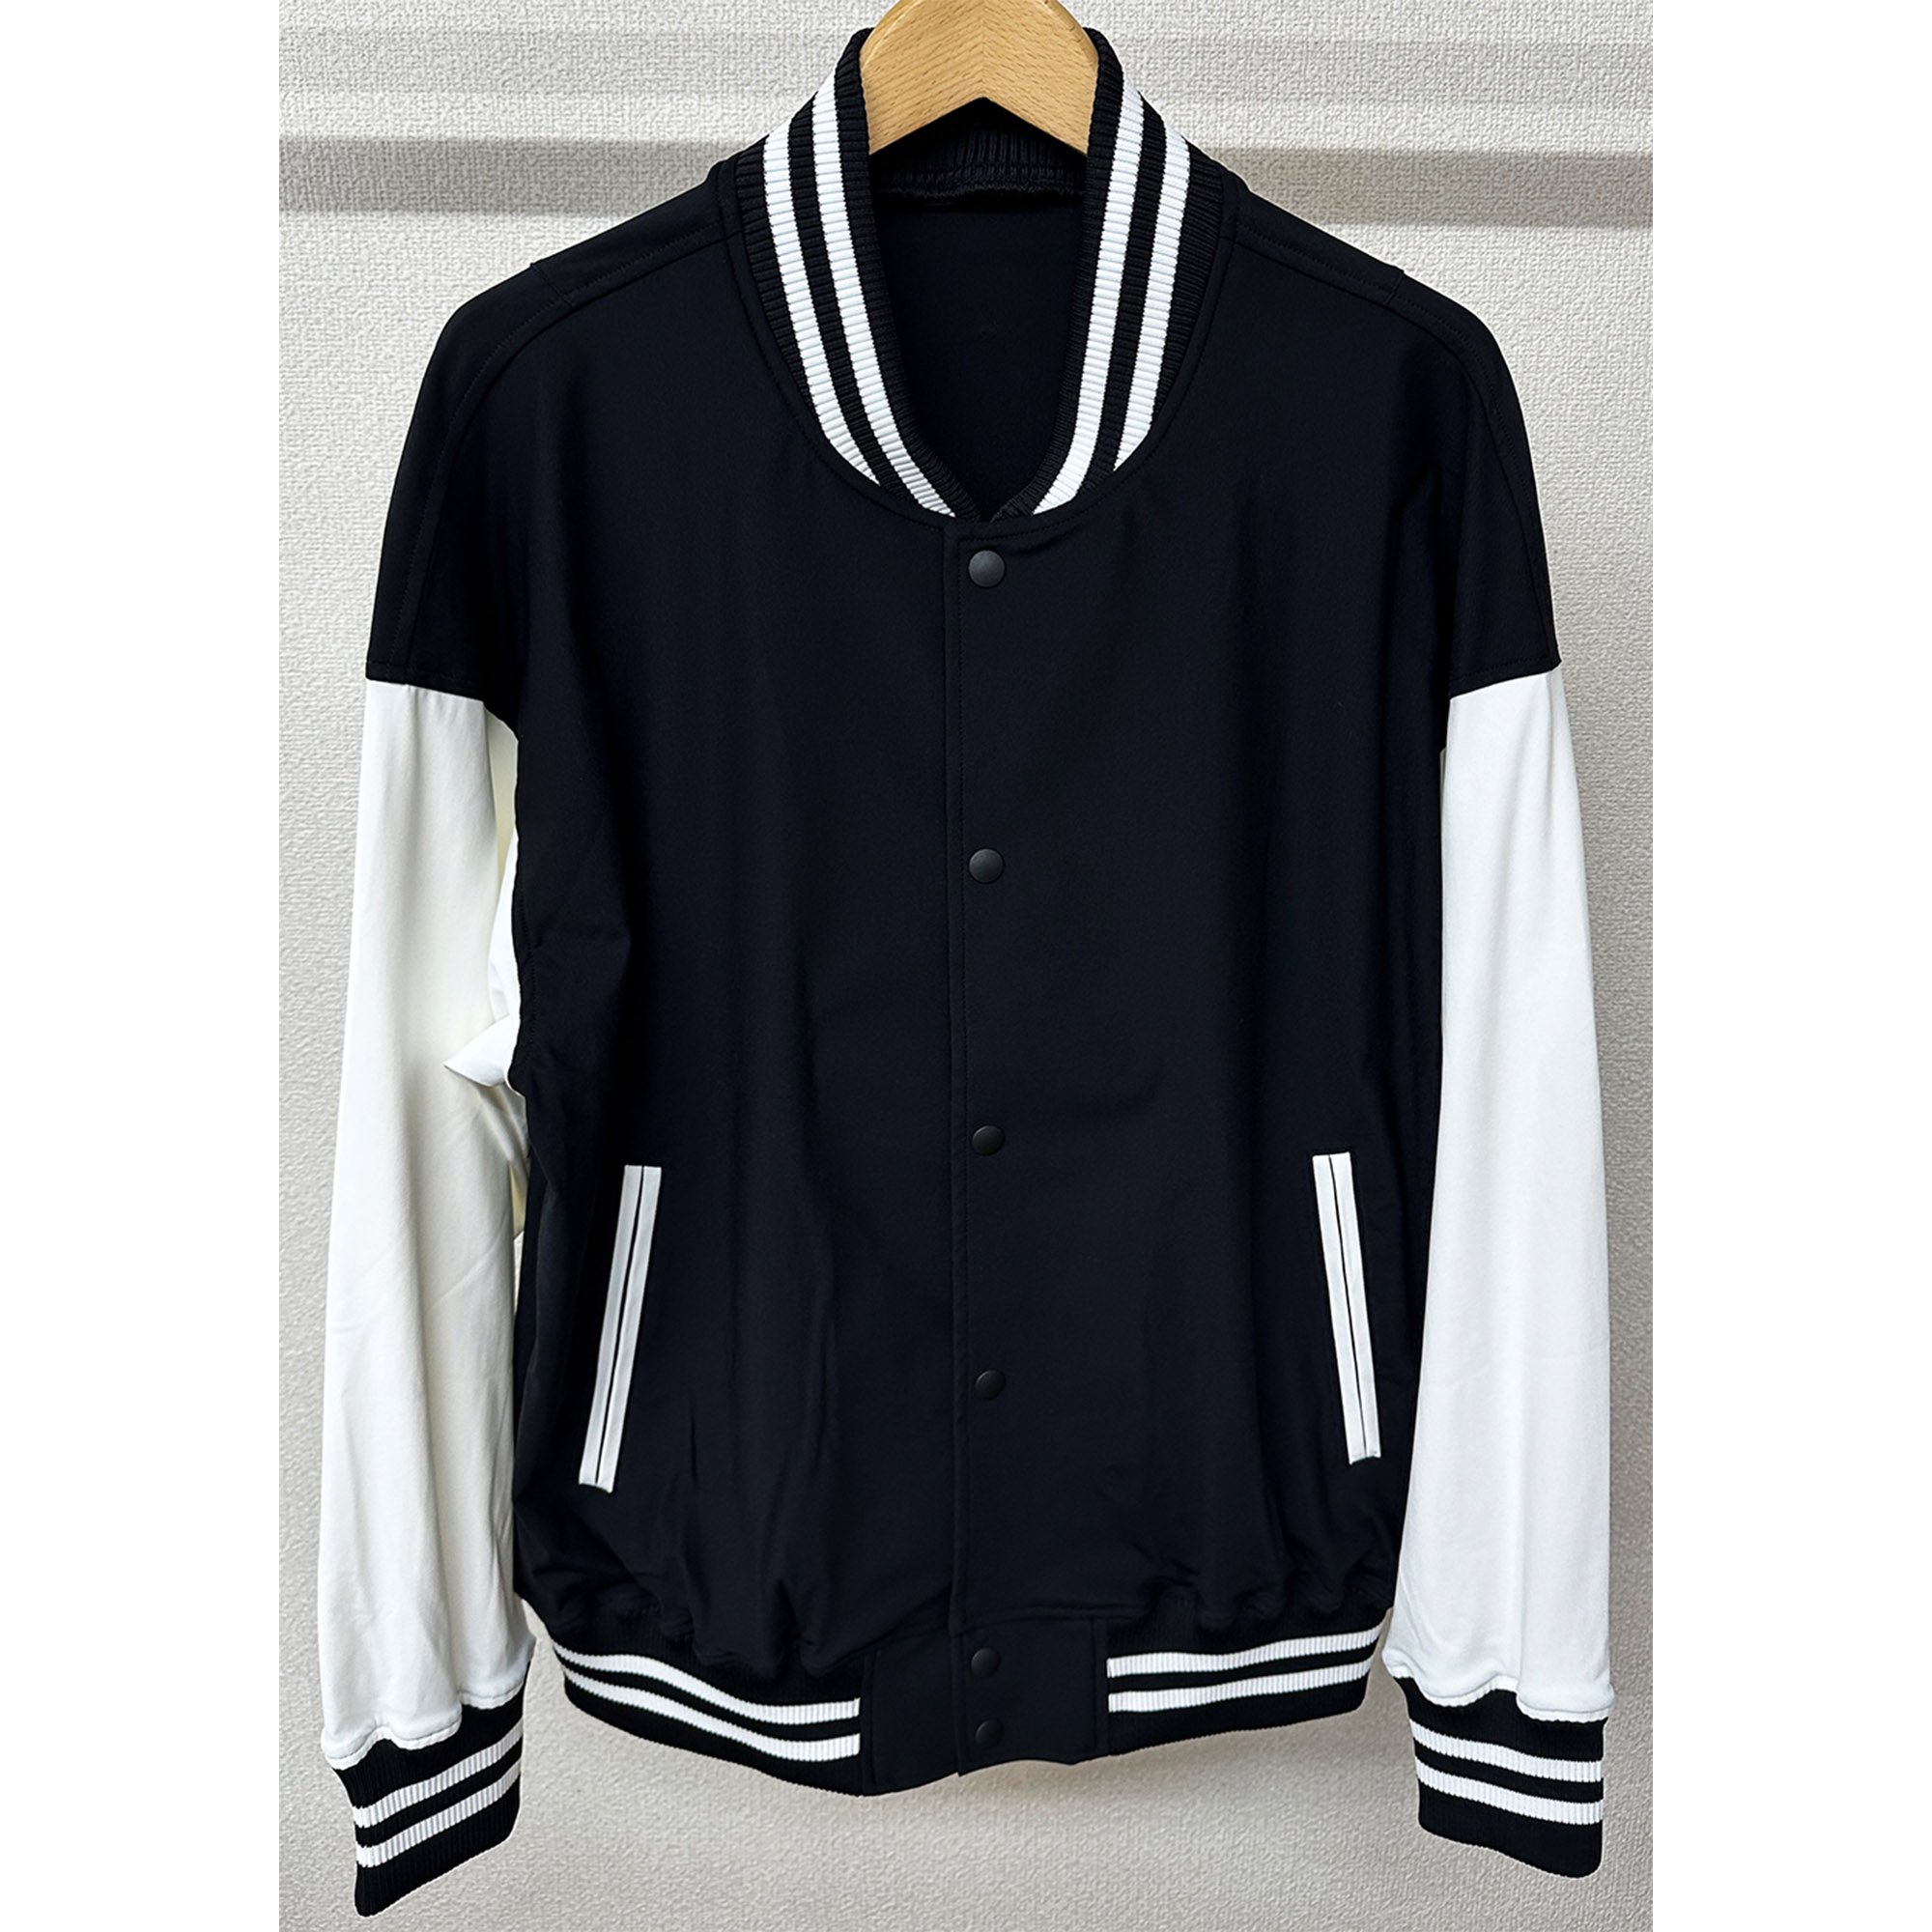 <img class='new_mark_img1' src='https://img.shop-pro.jp/img/new/icons1.gif' style='border:none;display:inline;margin:0px;padding:0px;width:auto;' />TECH OVER VARSITY JACKET BKWH